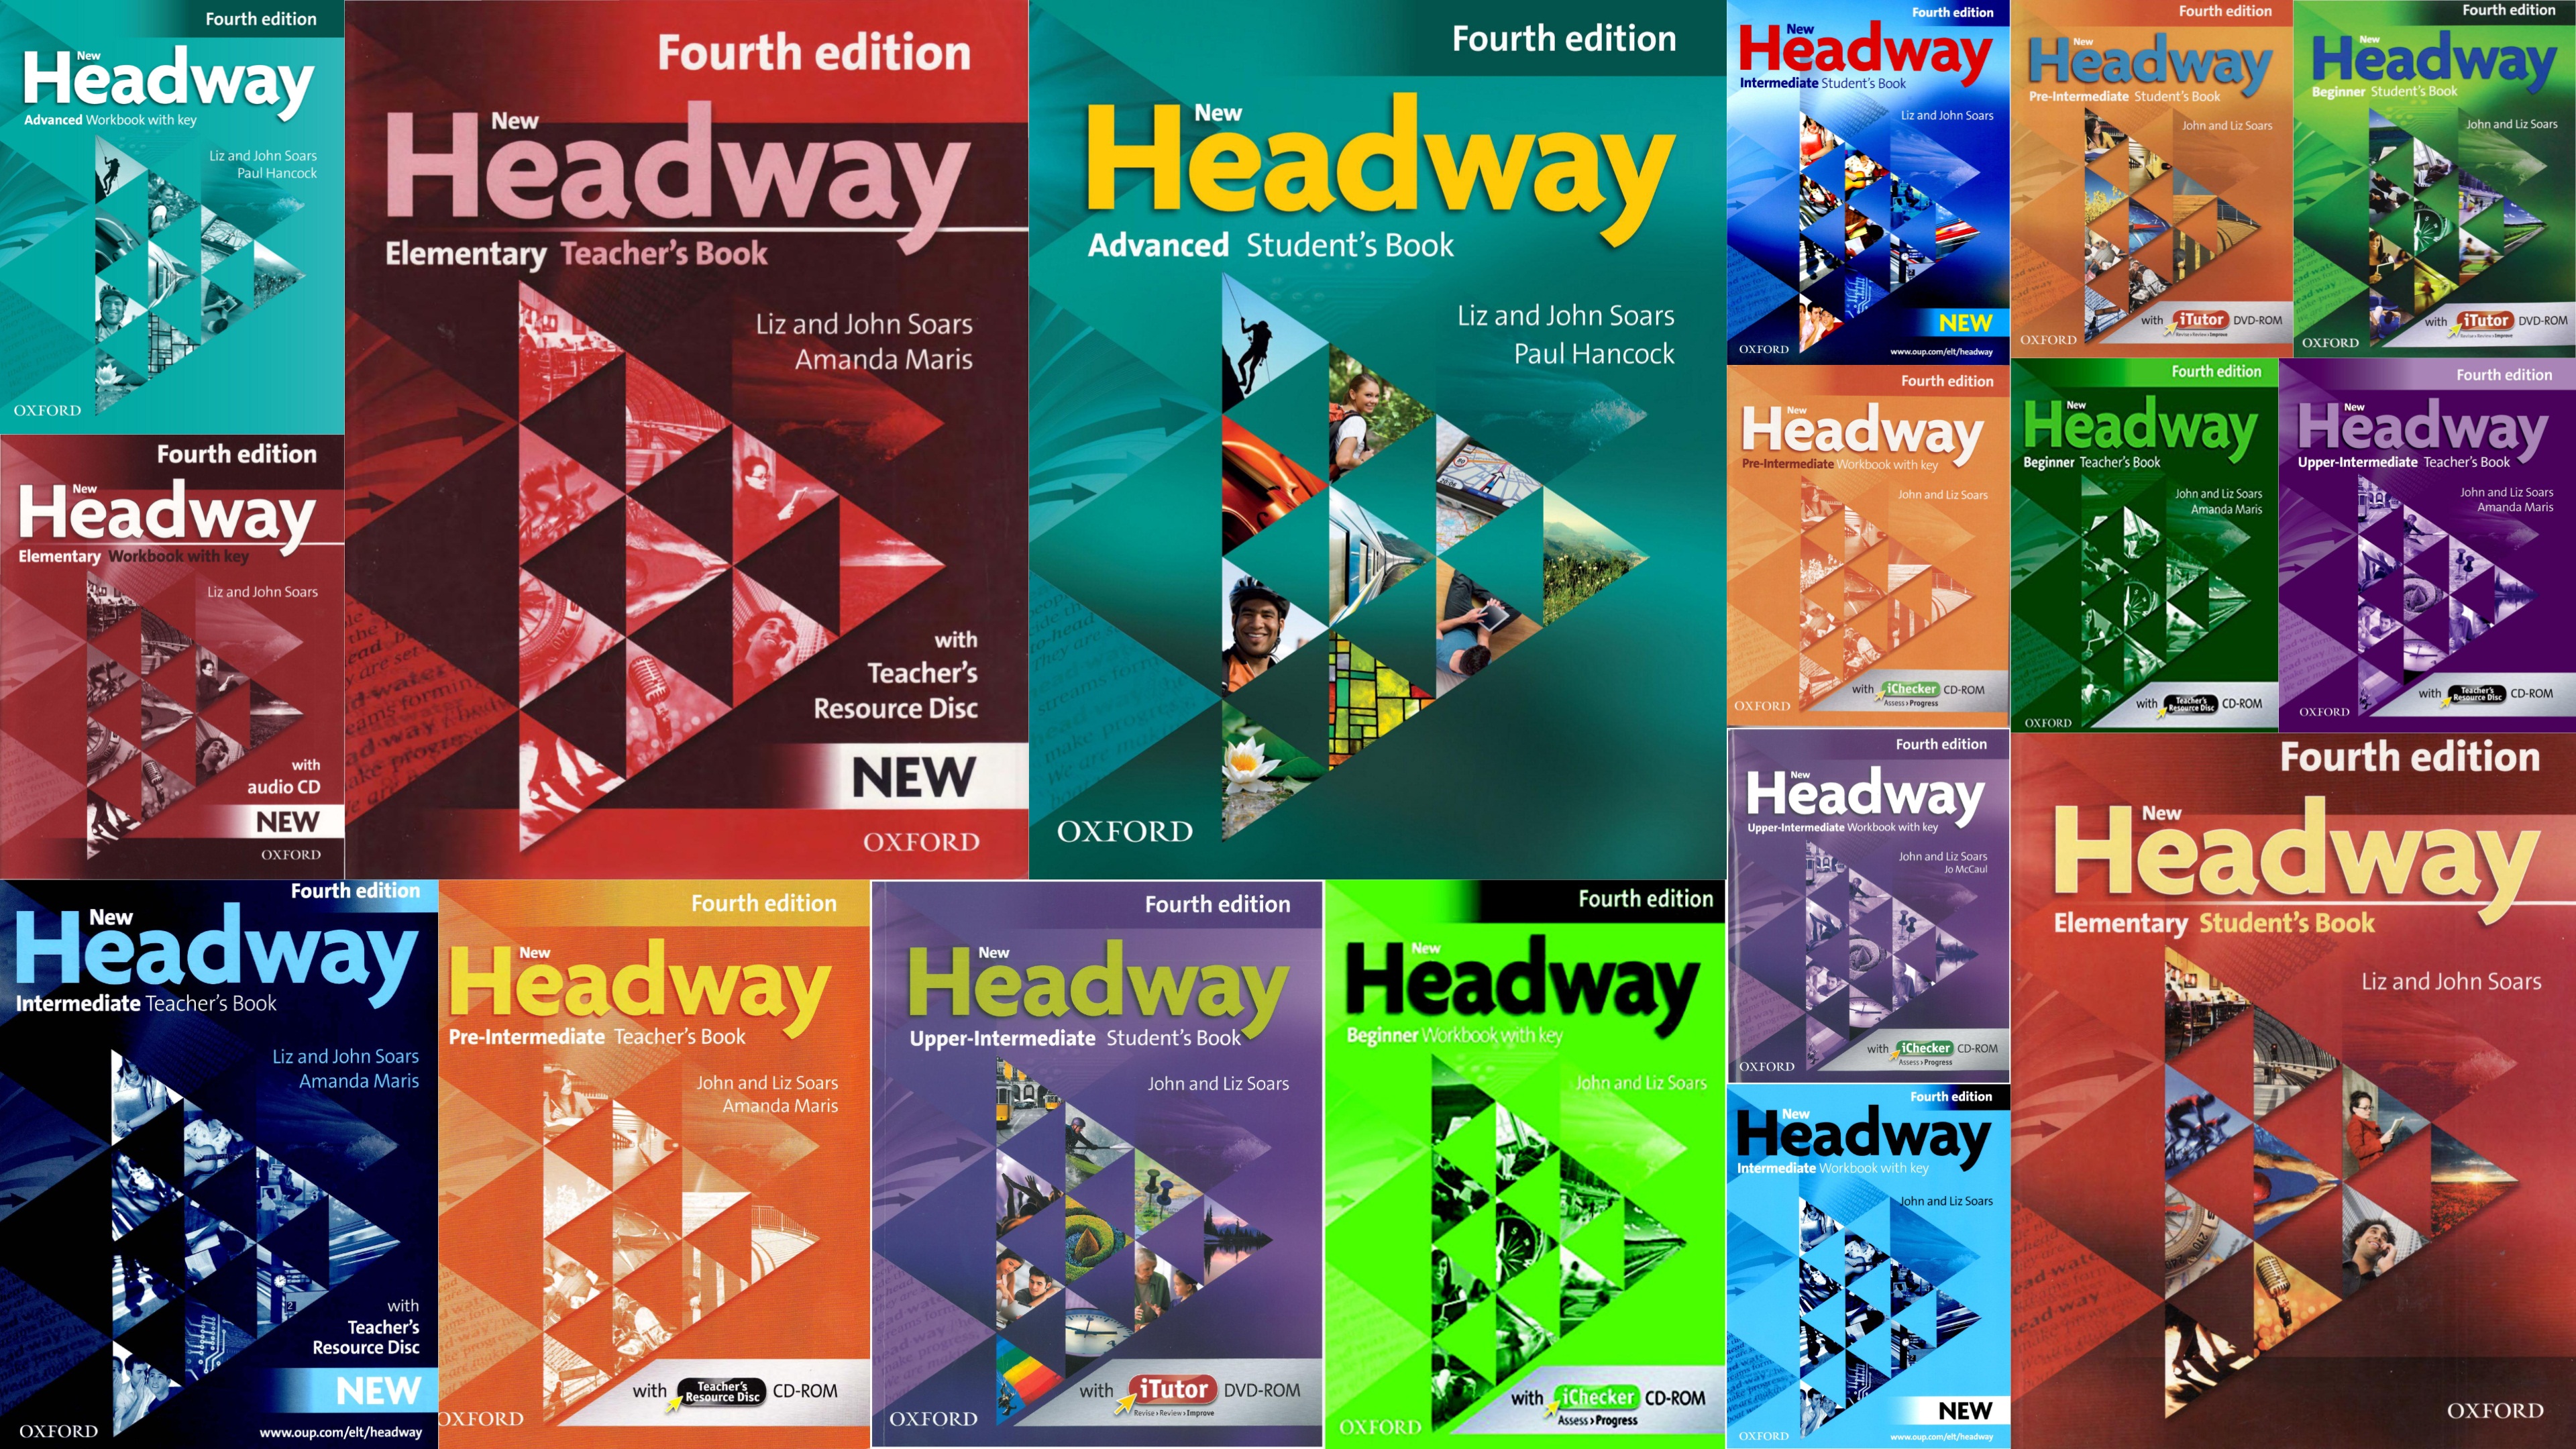 New headway advanced. New Headway Elementary 4th. New Headway Elementary student's book 4th Edition. New Headway Elementary 4 Edition. New Headway Elementary 5th Edition.